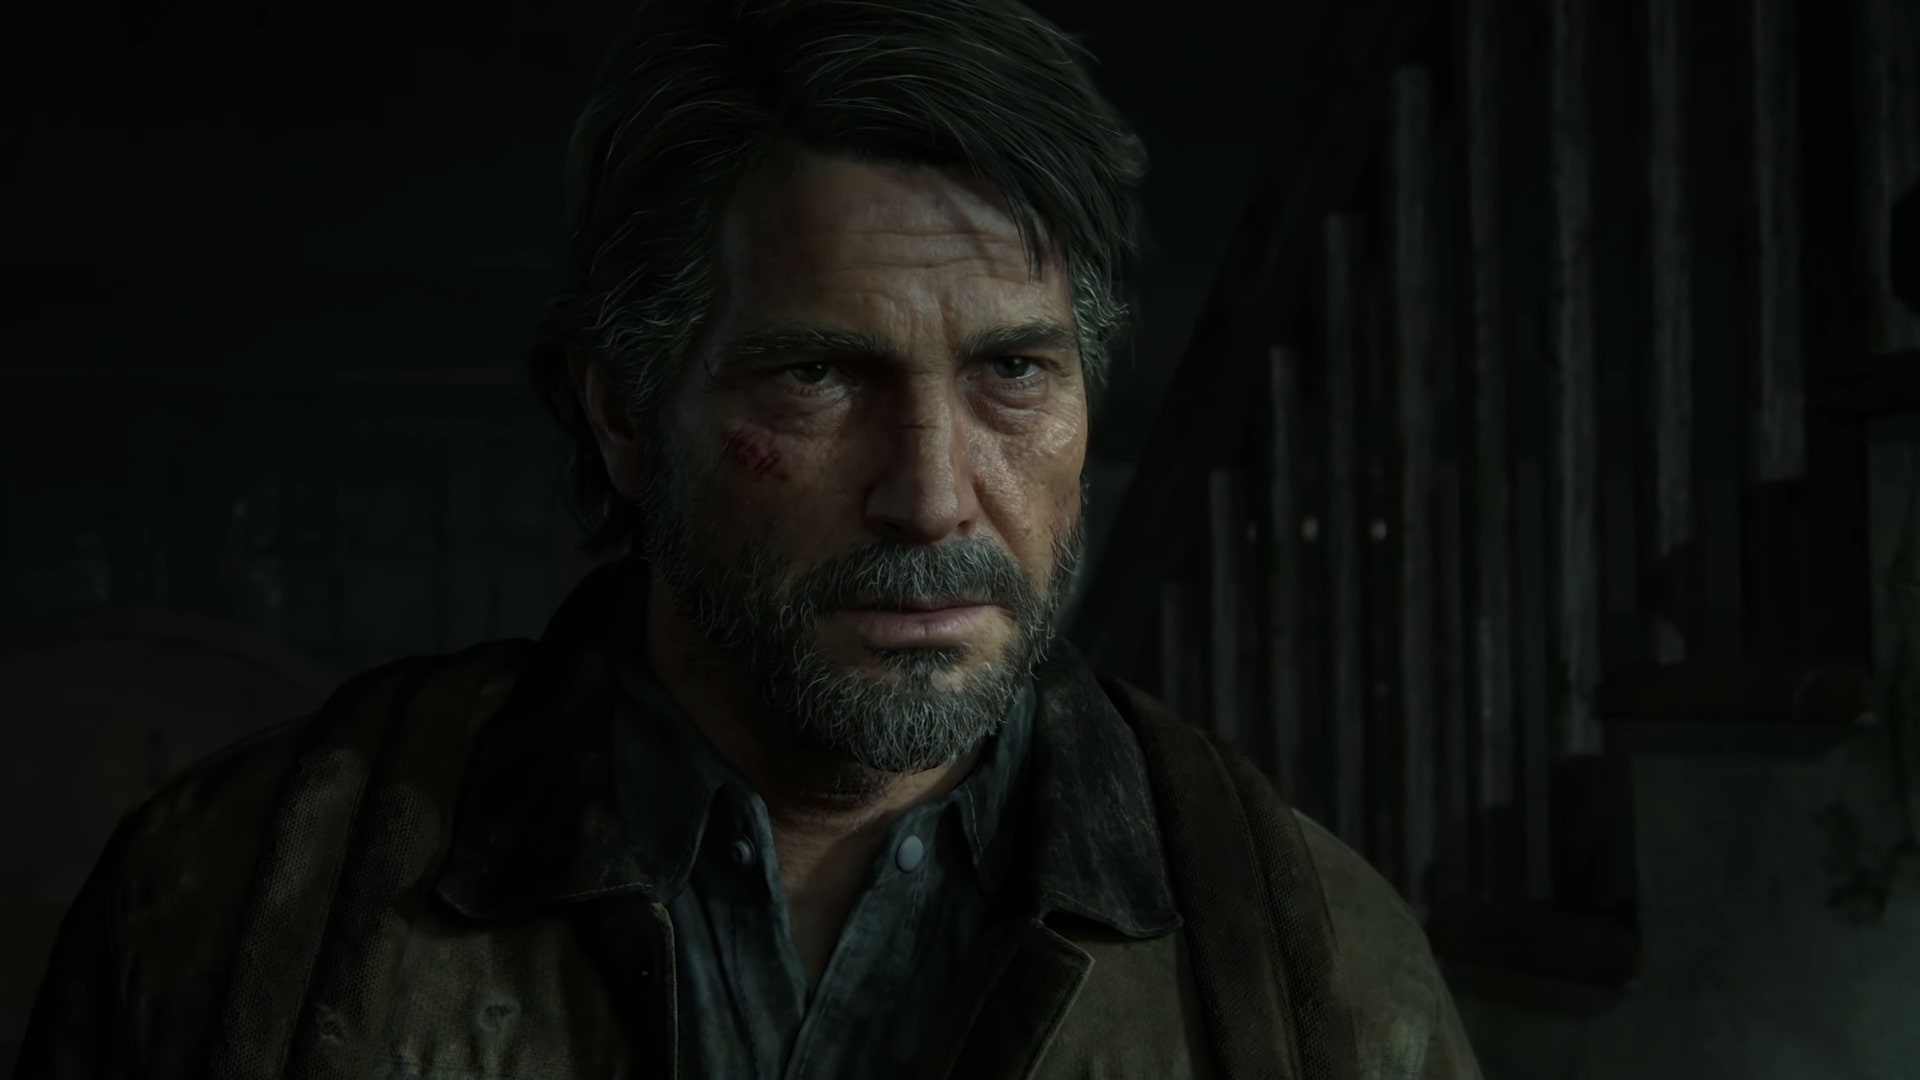 The Last of Us 2 director: "Joel plays a major part of this game ...